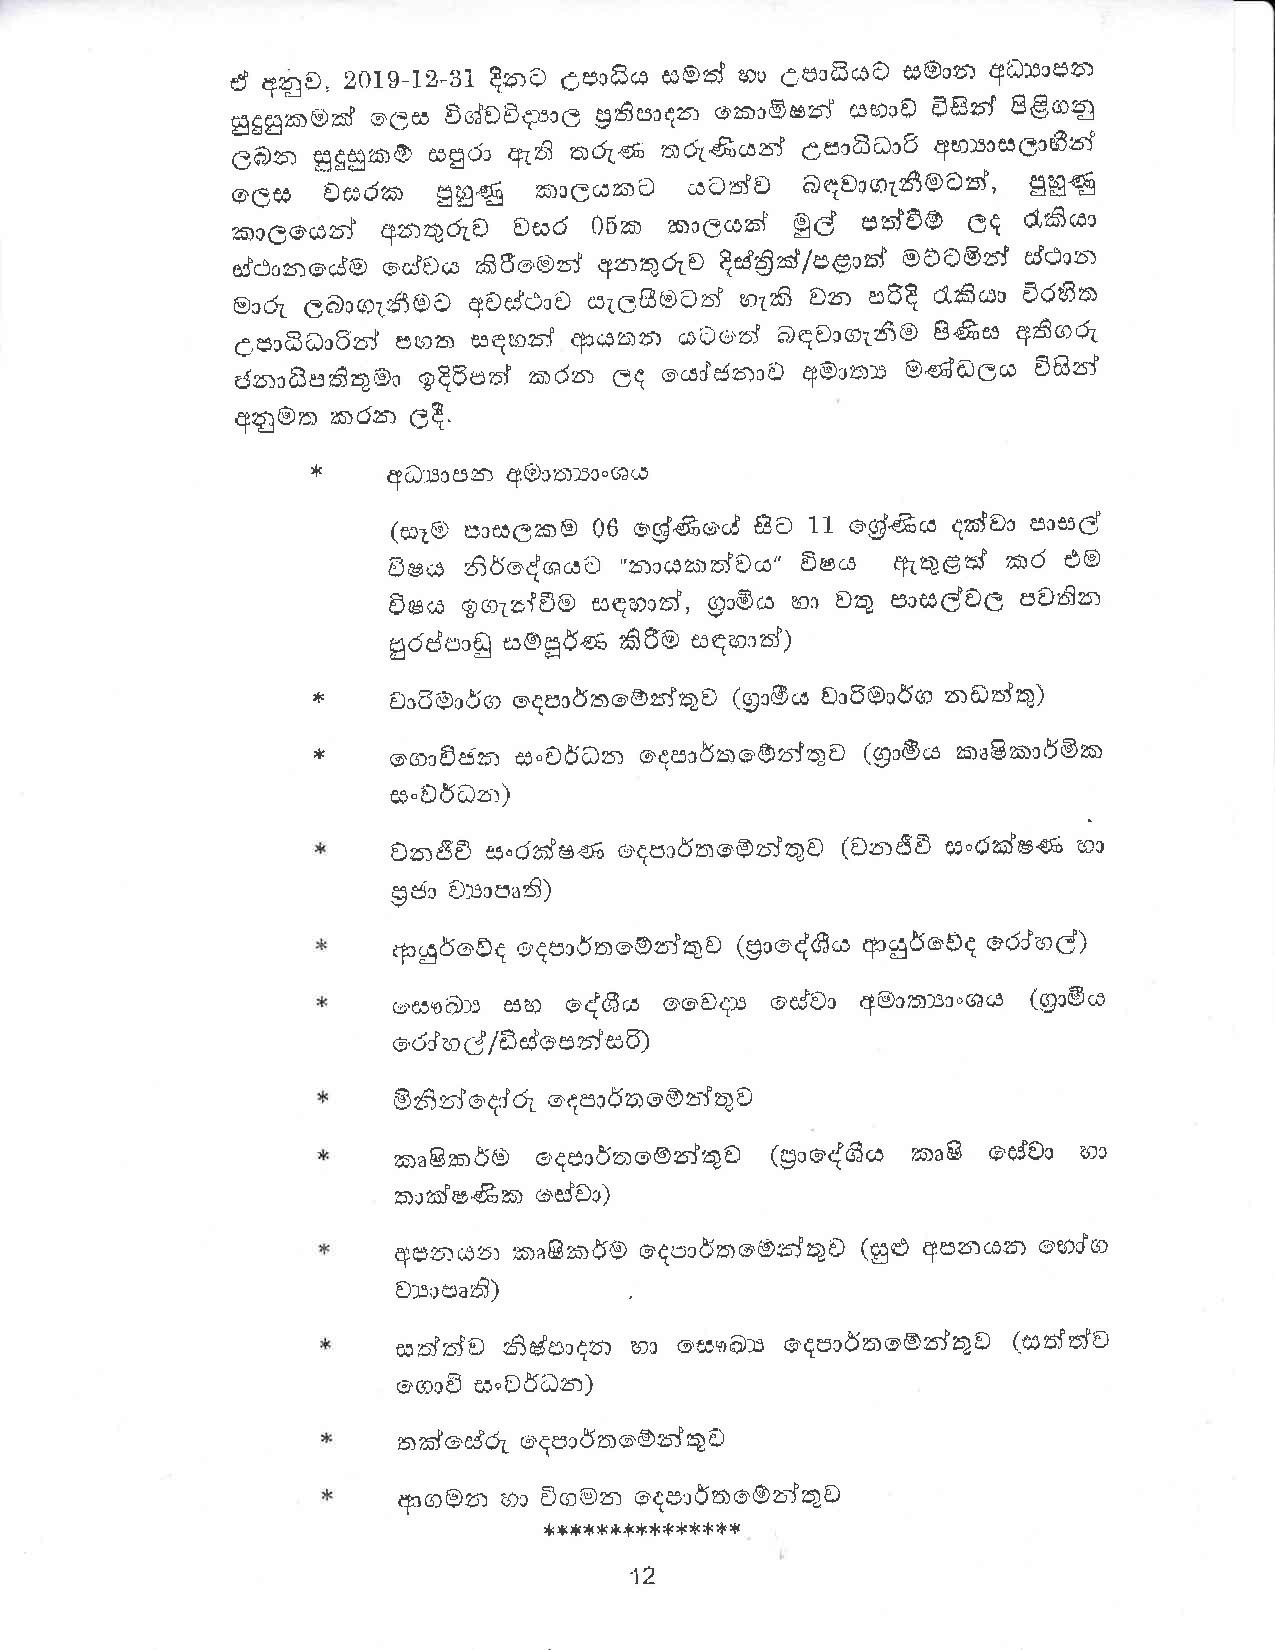 Cabinet Decision on 05.02.2020 page 012